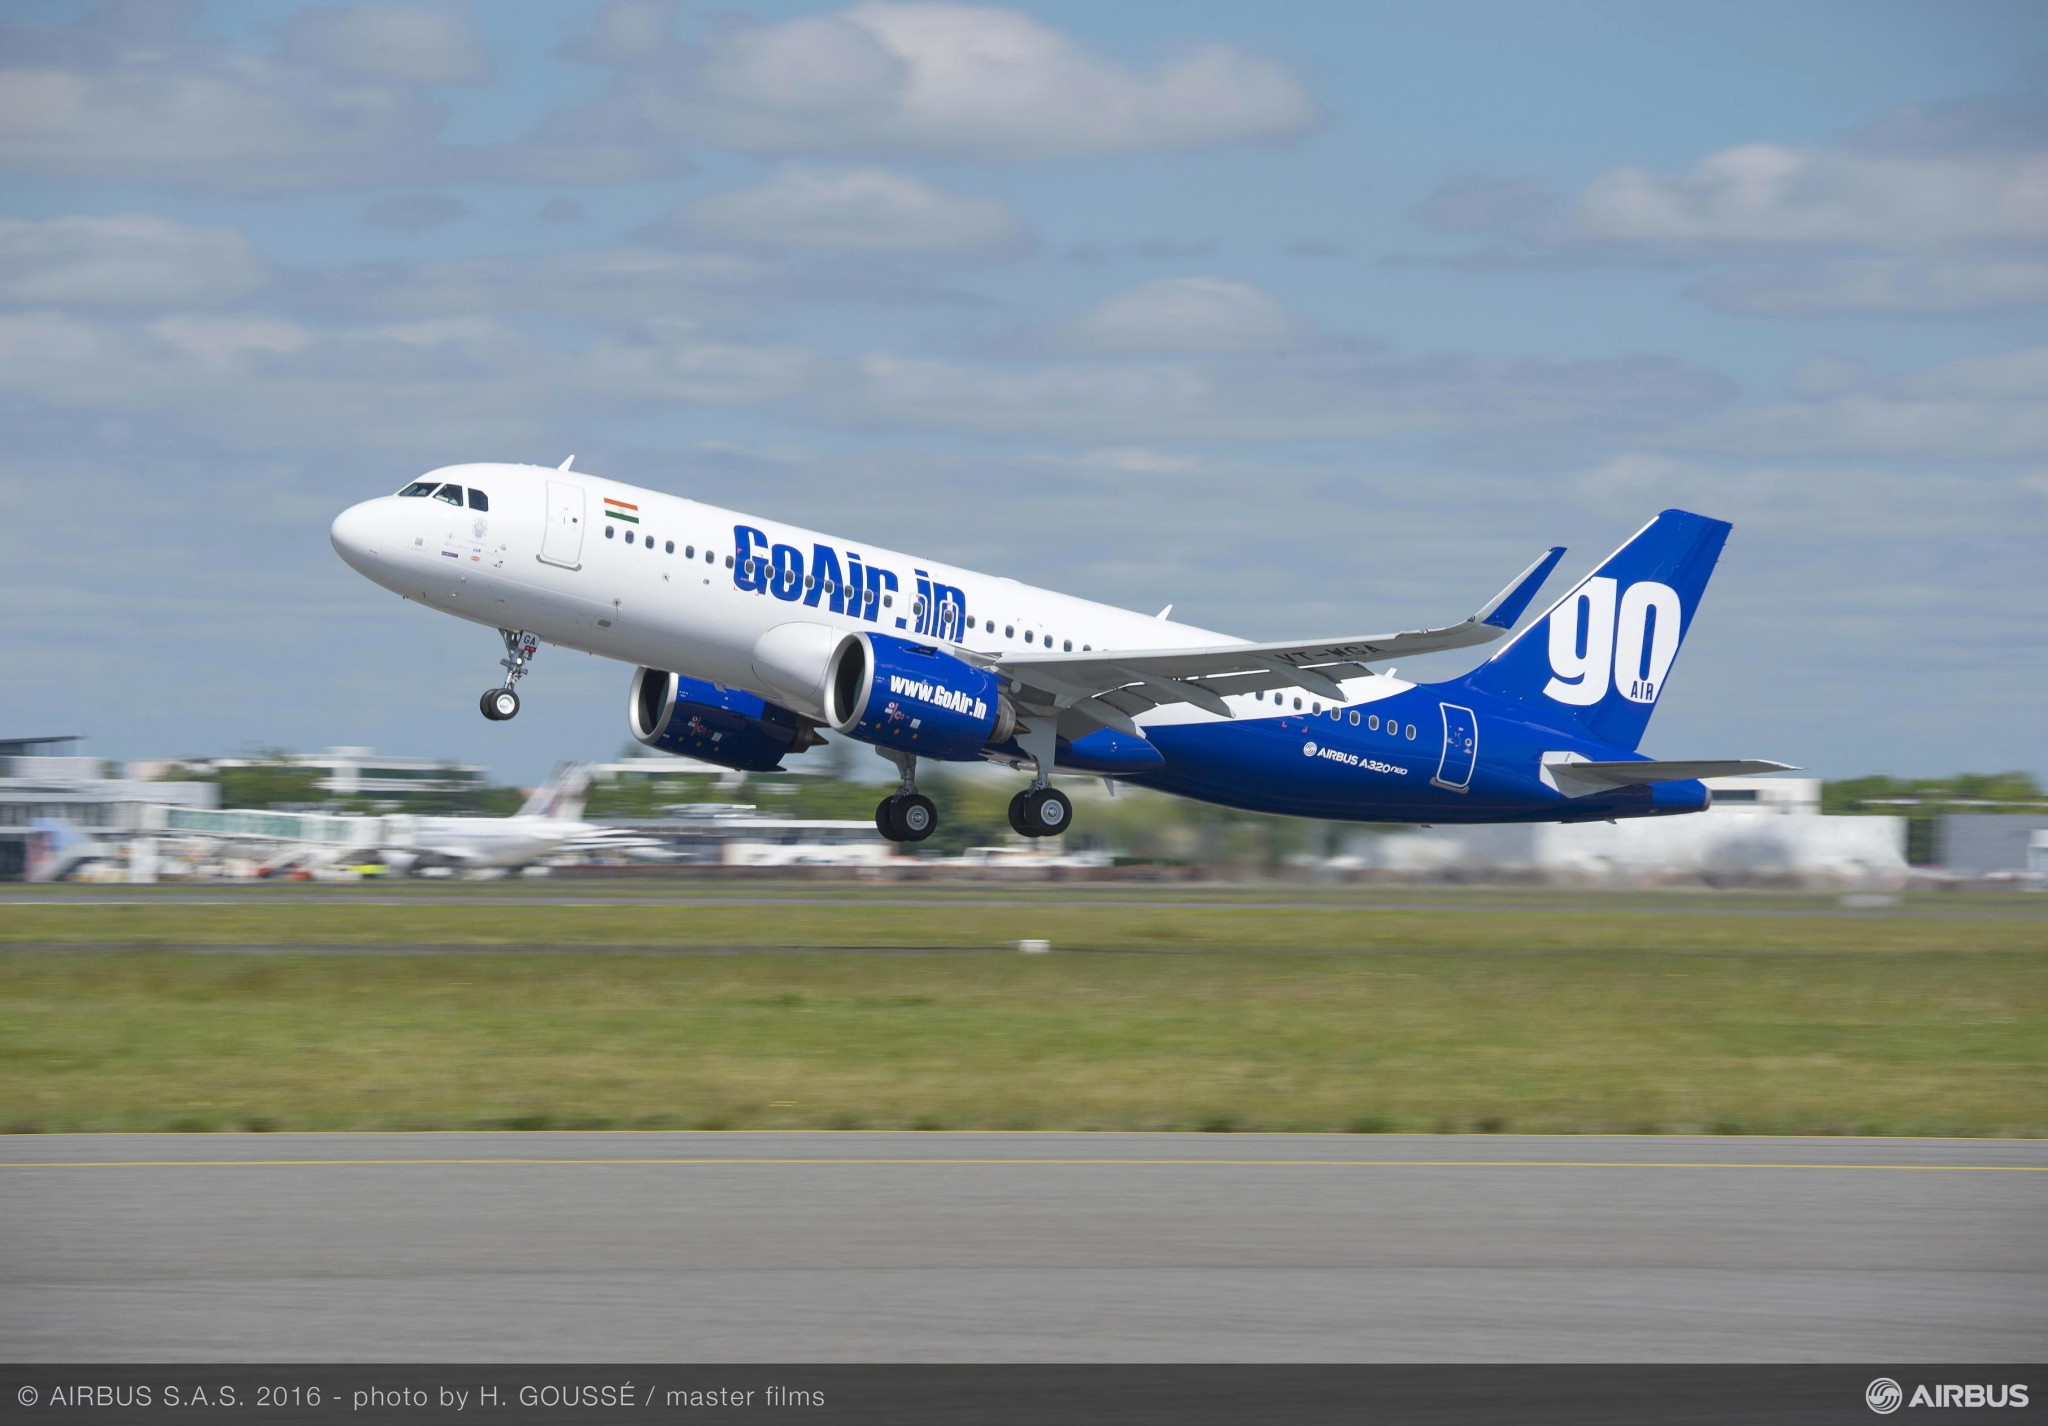 CDB Aviation takes delivery of its 100th A320 family aircraft from Airbus